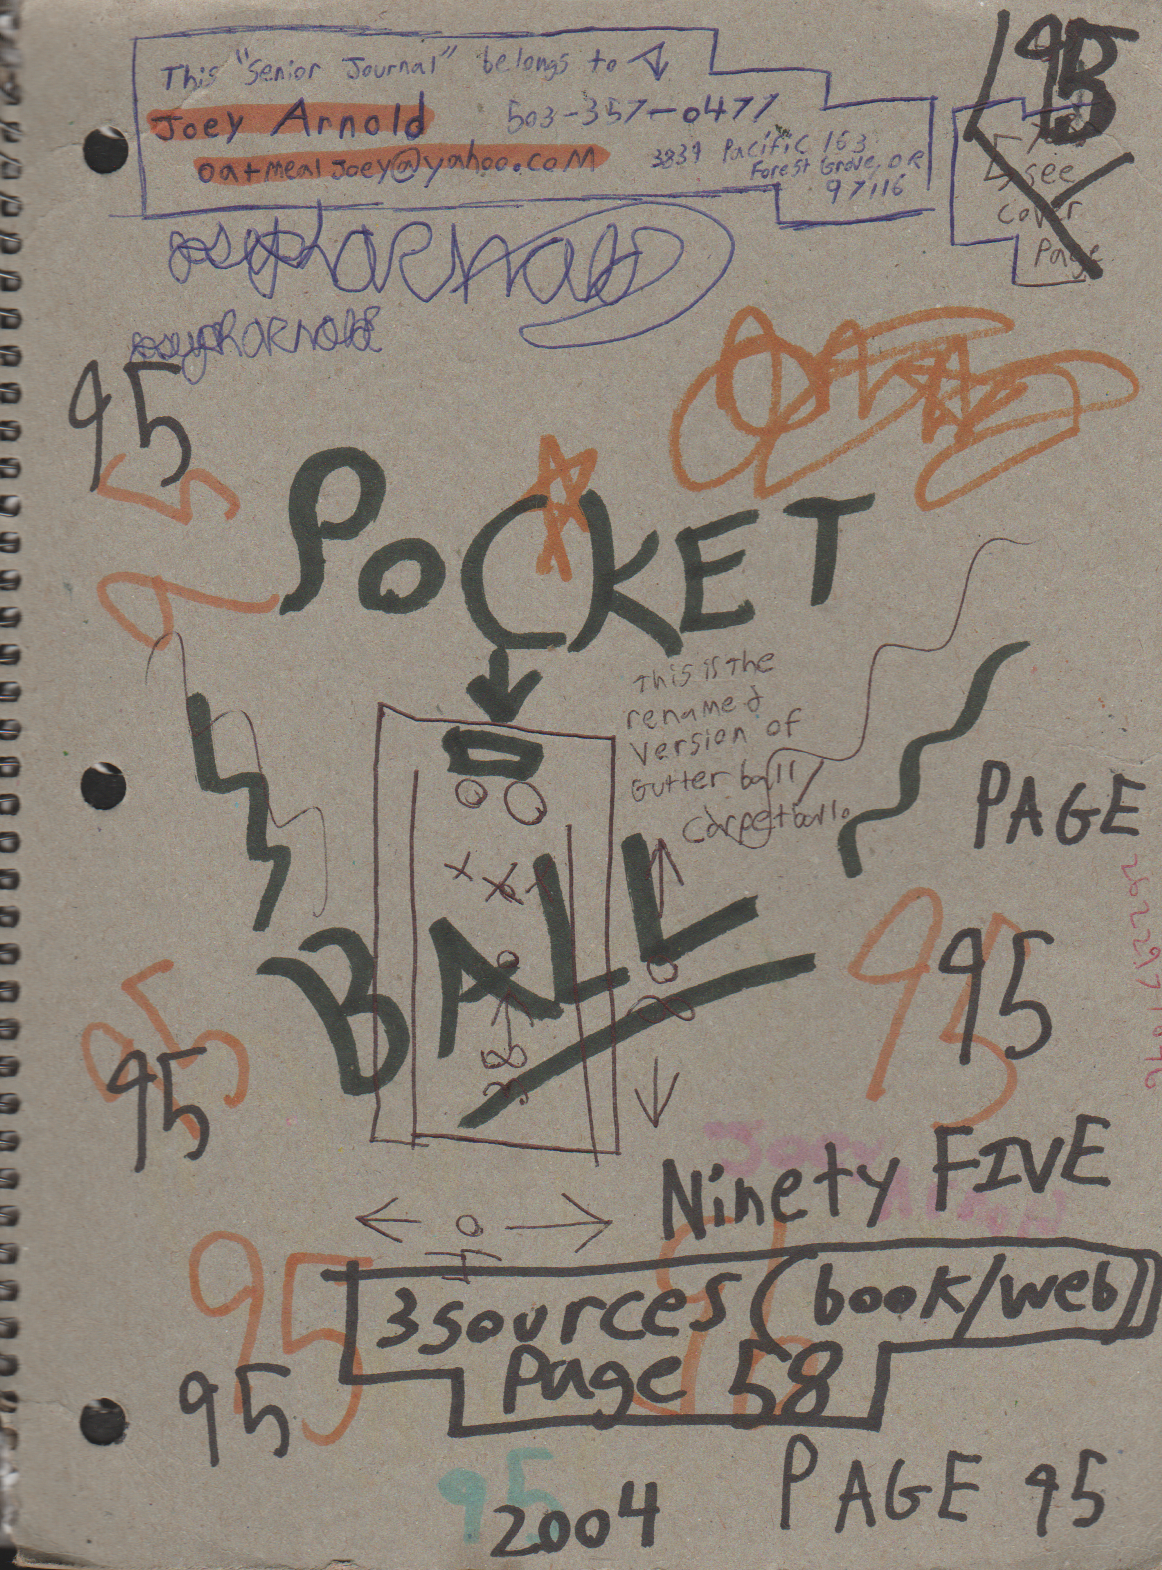 2004-01-29 - Thursday - Carpetball FGHS Senior Project Journal, Joey Arnold, Part 02, 96pages numbered, Notebook-93.png